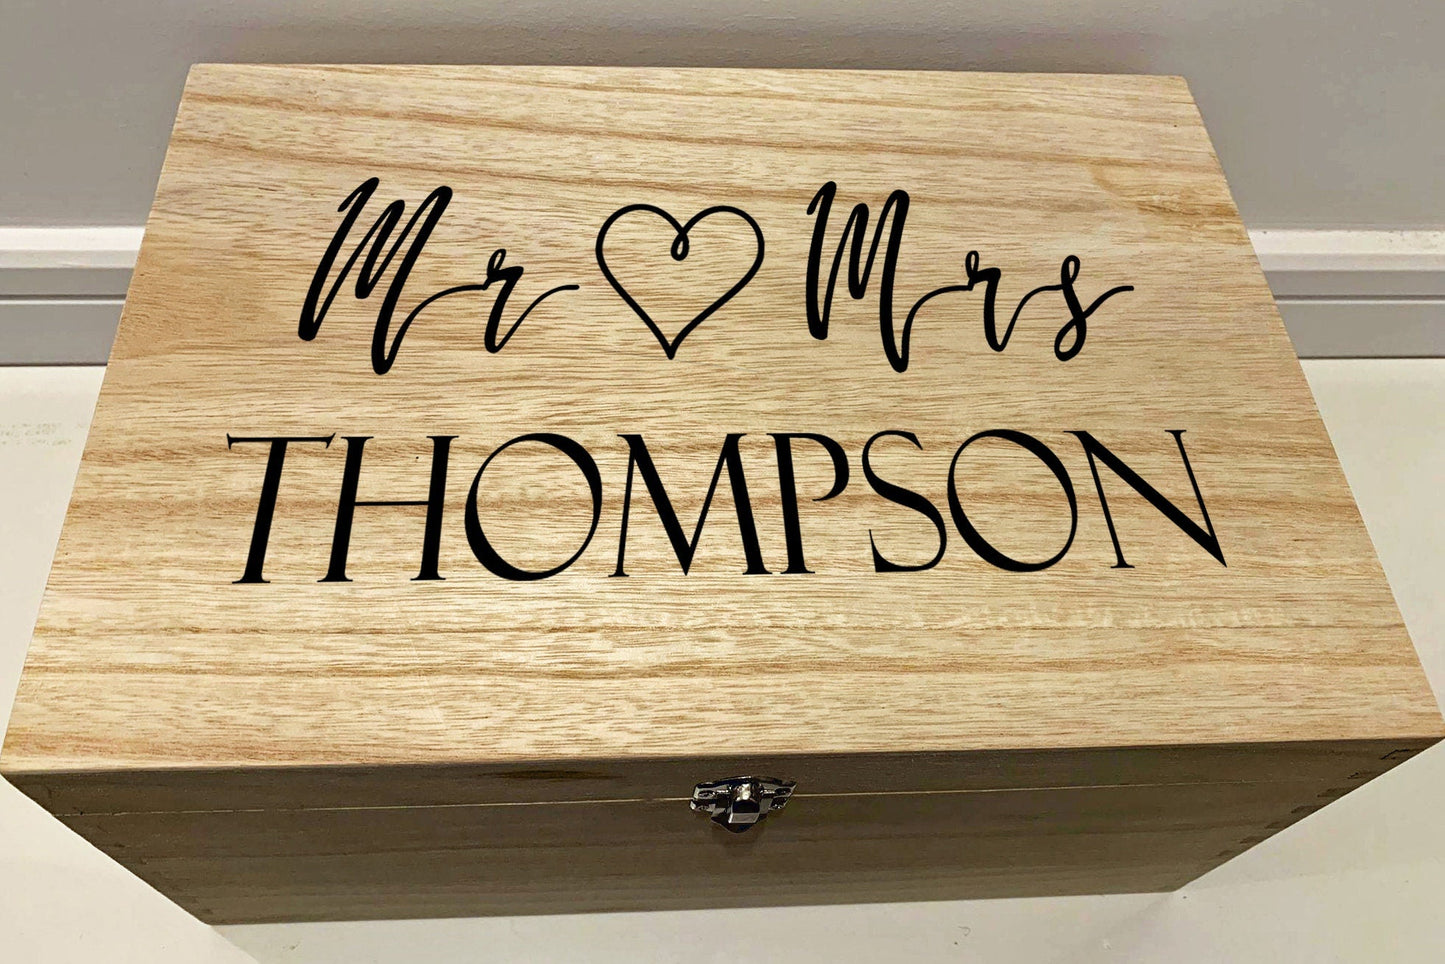 Large Personalised Engraved Wooden Mr and Mrs Keepsake Box with Heart - Resplendent Aurora